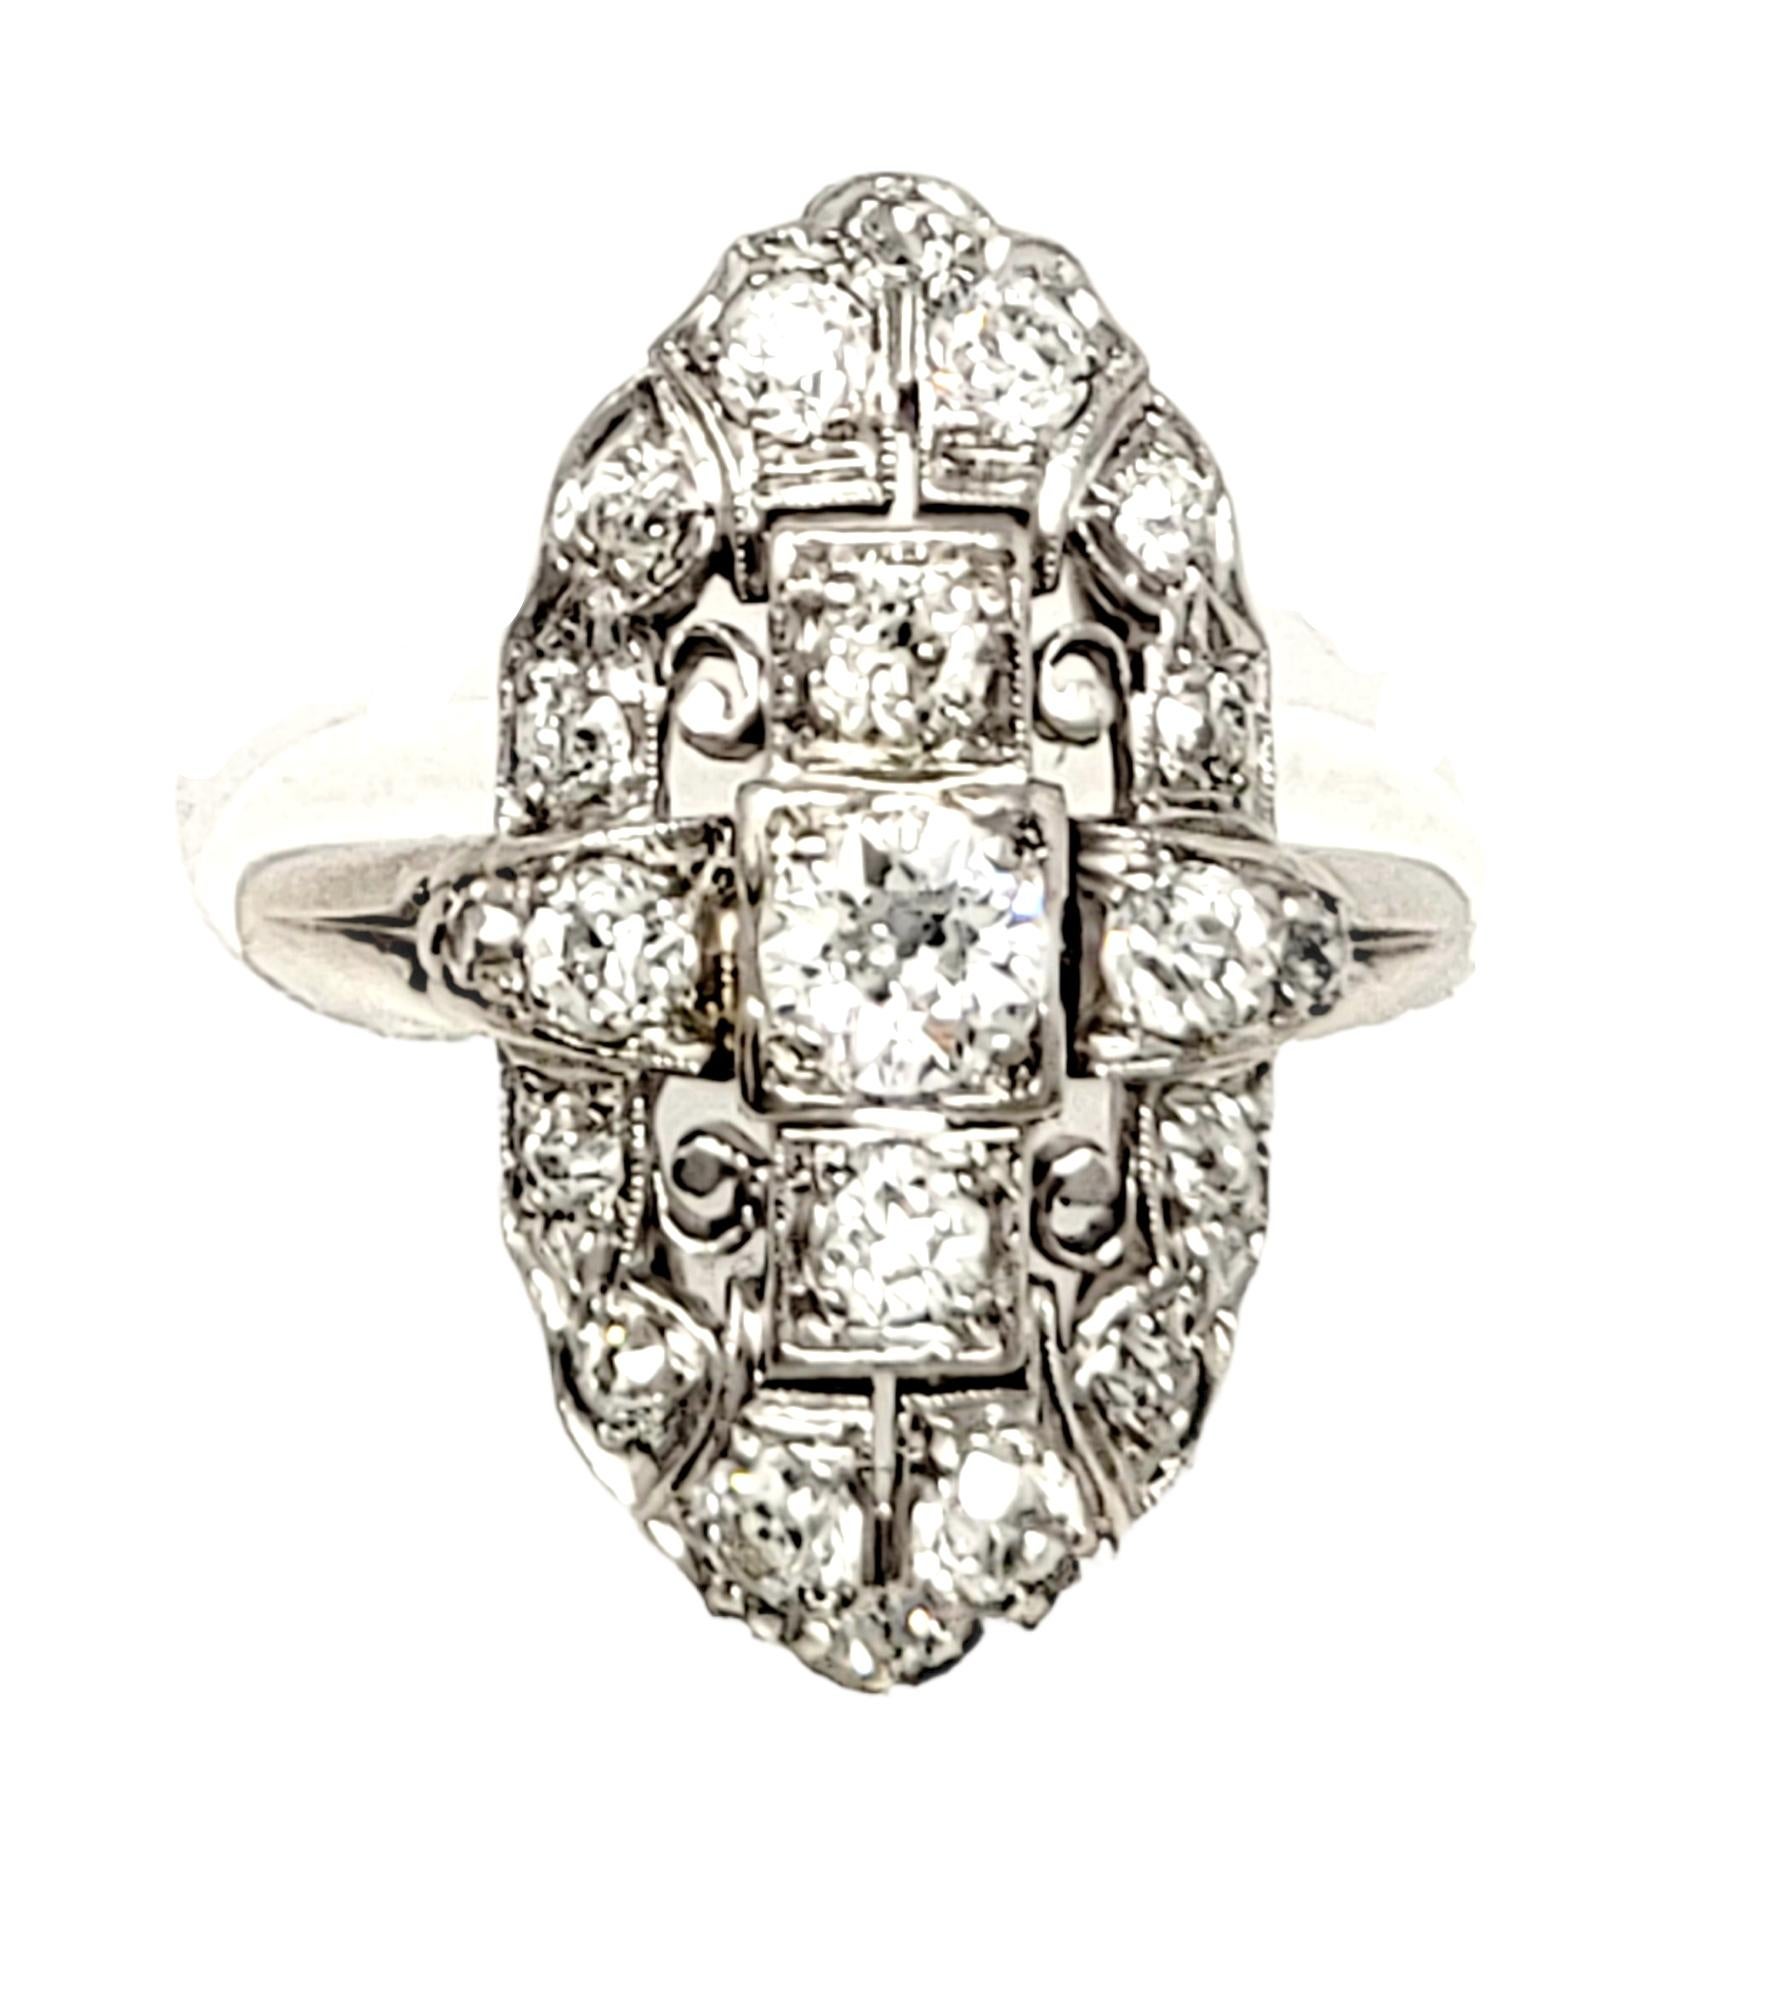 Vintage Old European Cut Diamond Navette Ring in Palladium 1.75 Carats Total For Sale 5